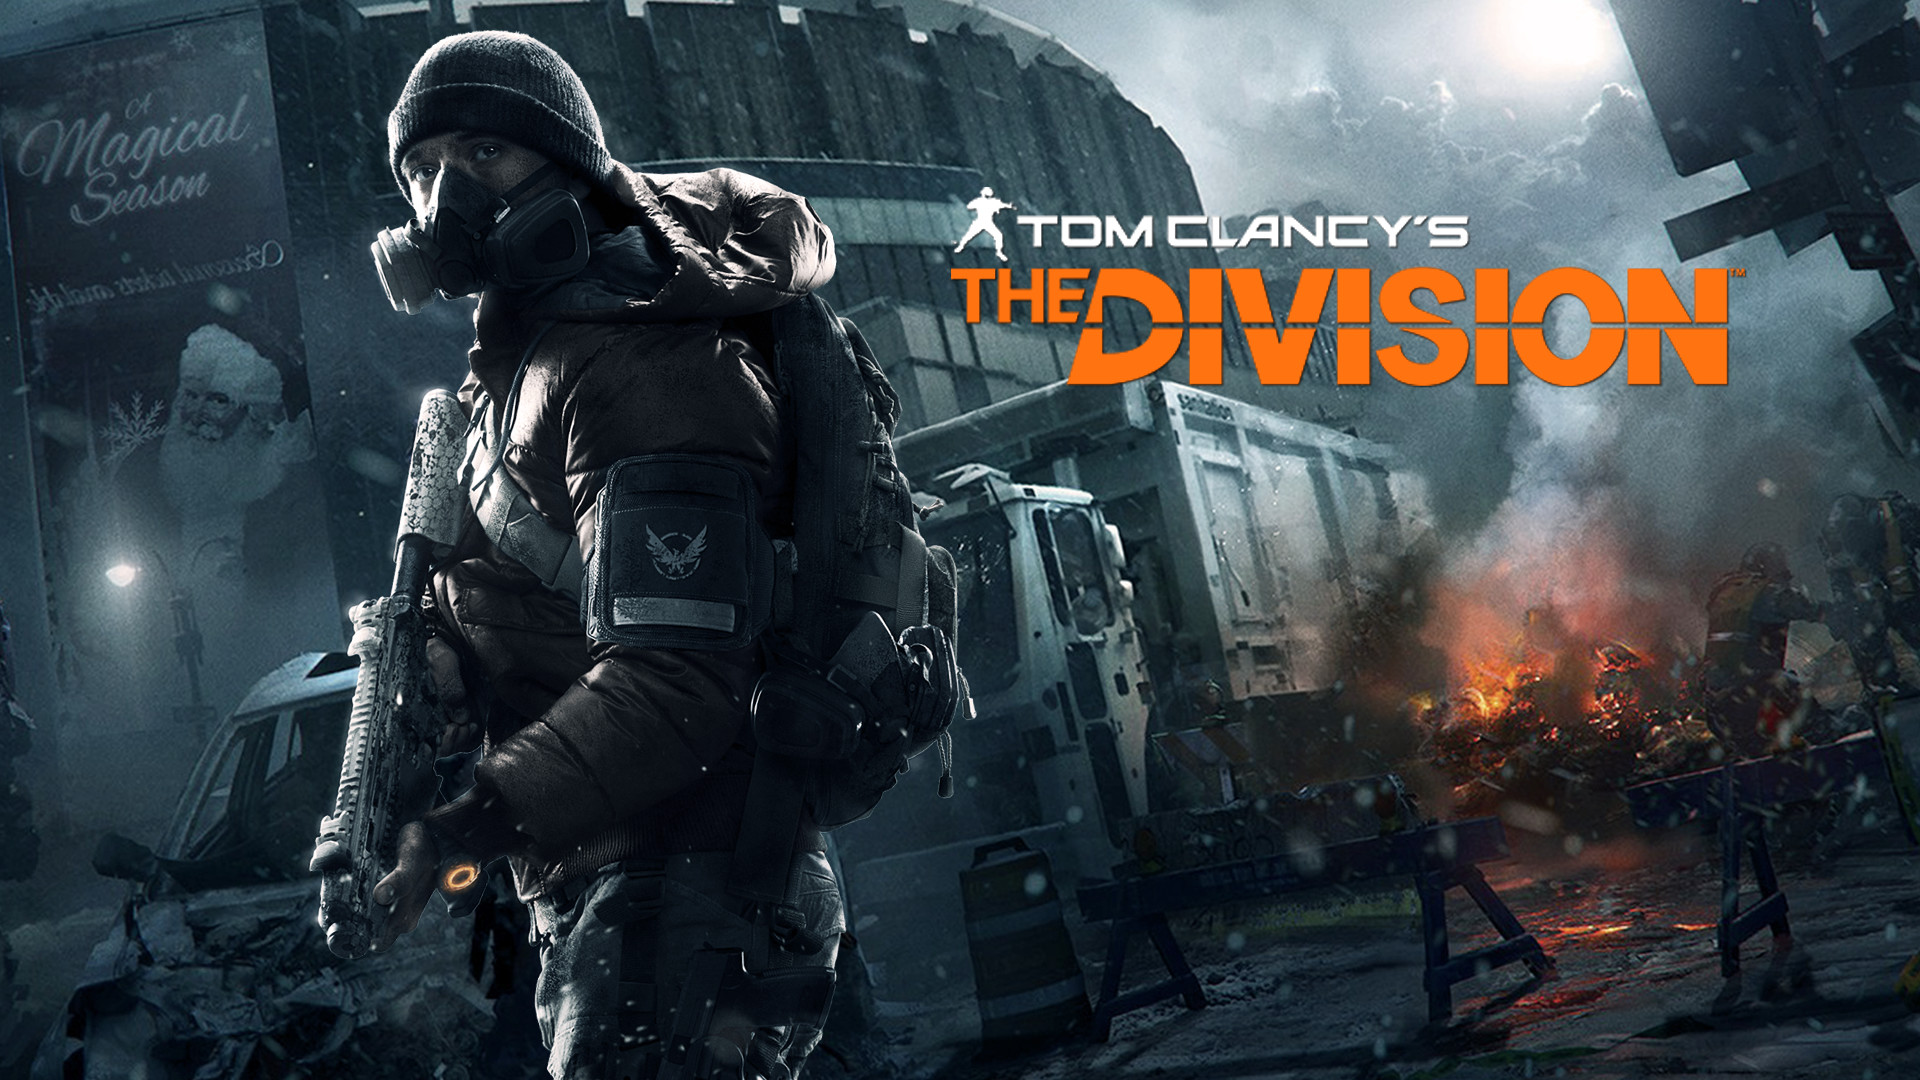 The Division – PS4 HD Wallpaper by EversonTomiello